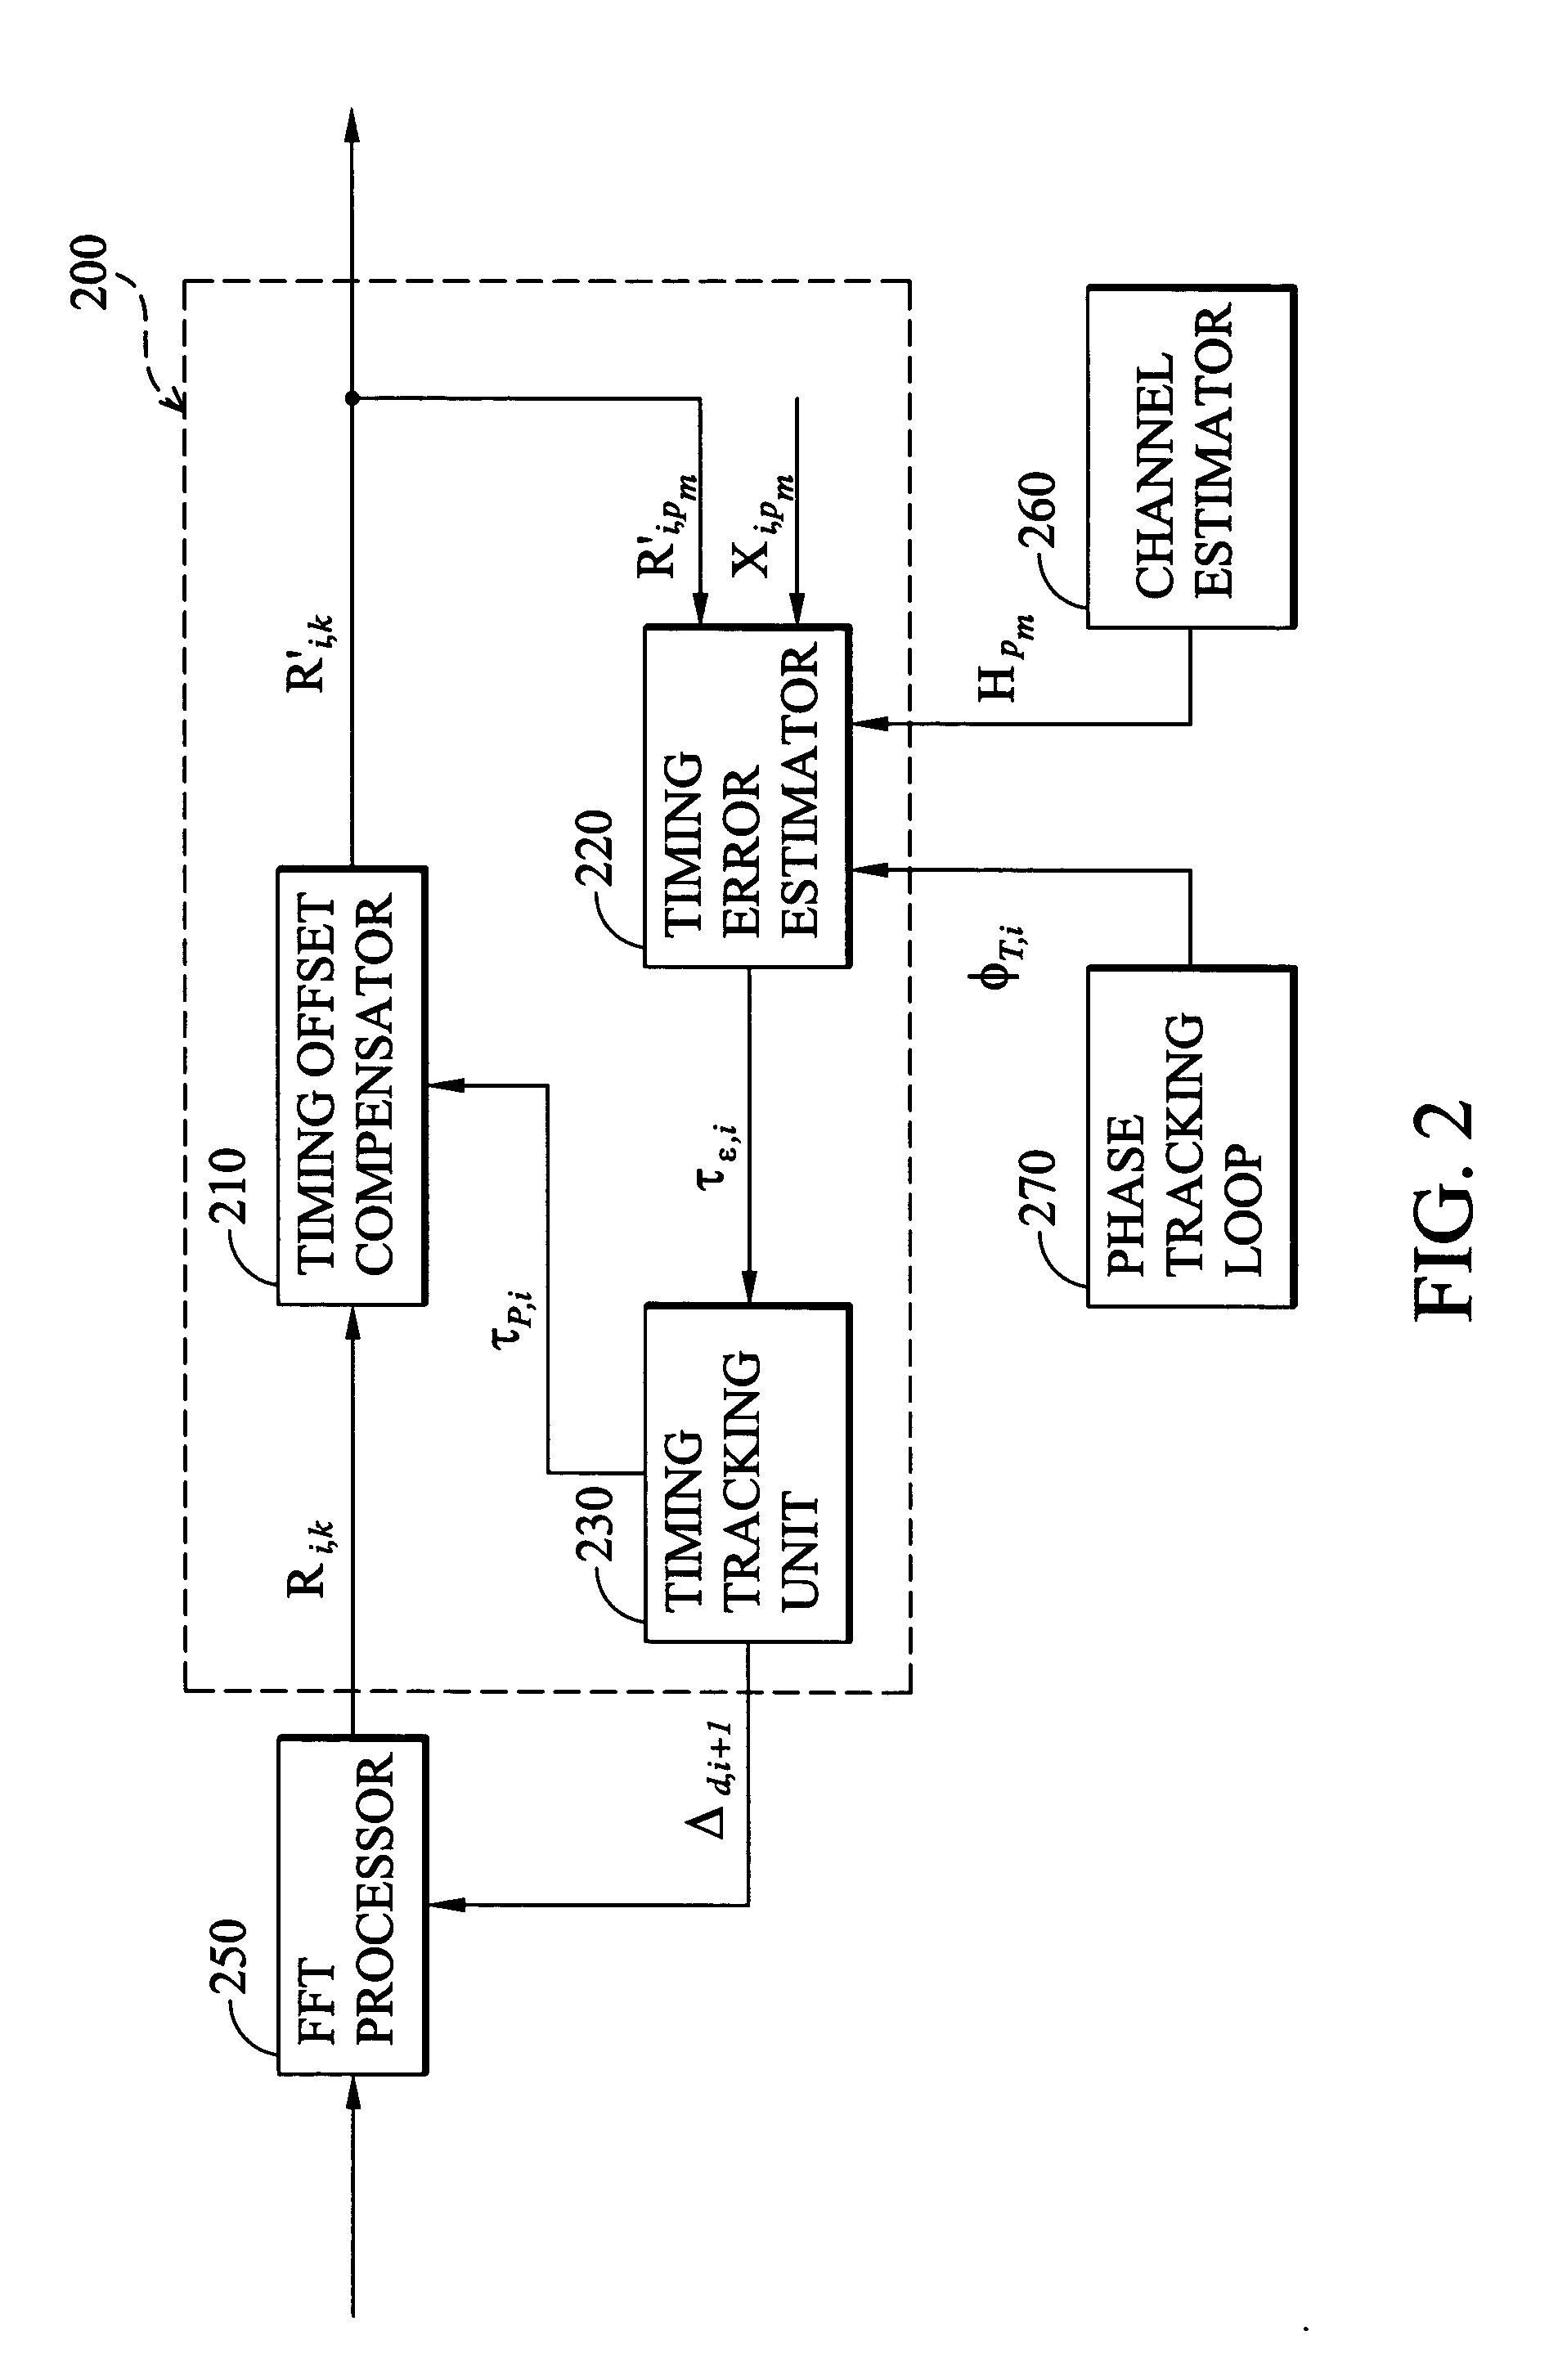 Timing offset compensation in orthogonal frequency division multiplexing systems